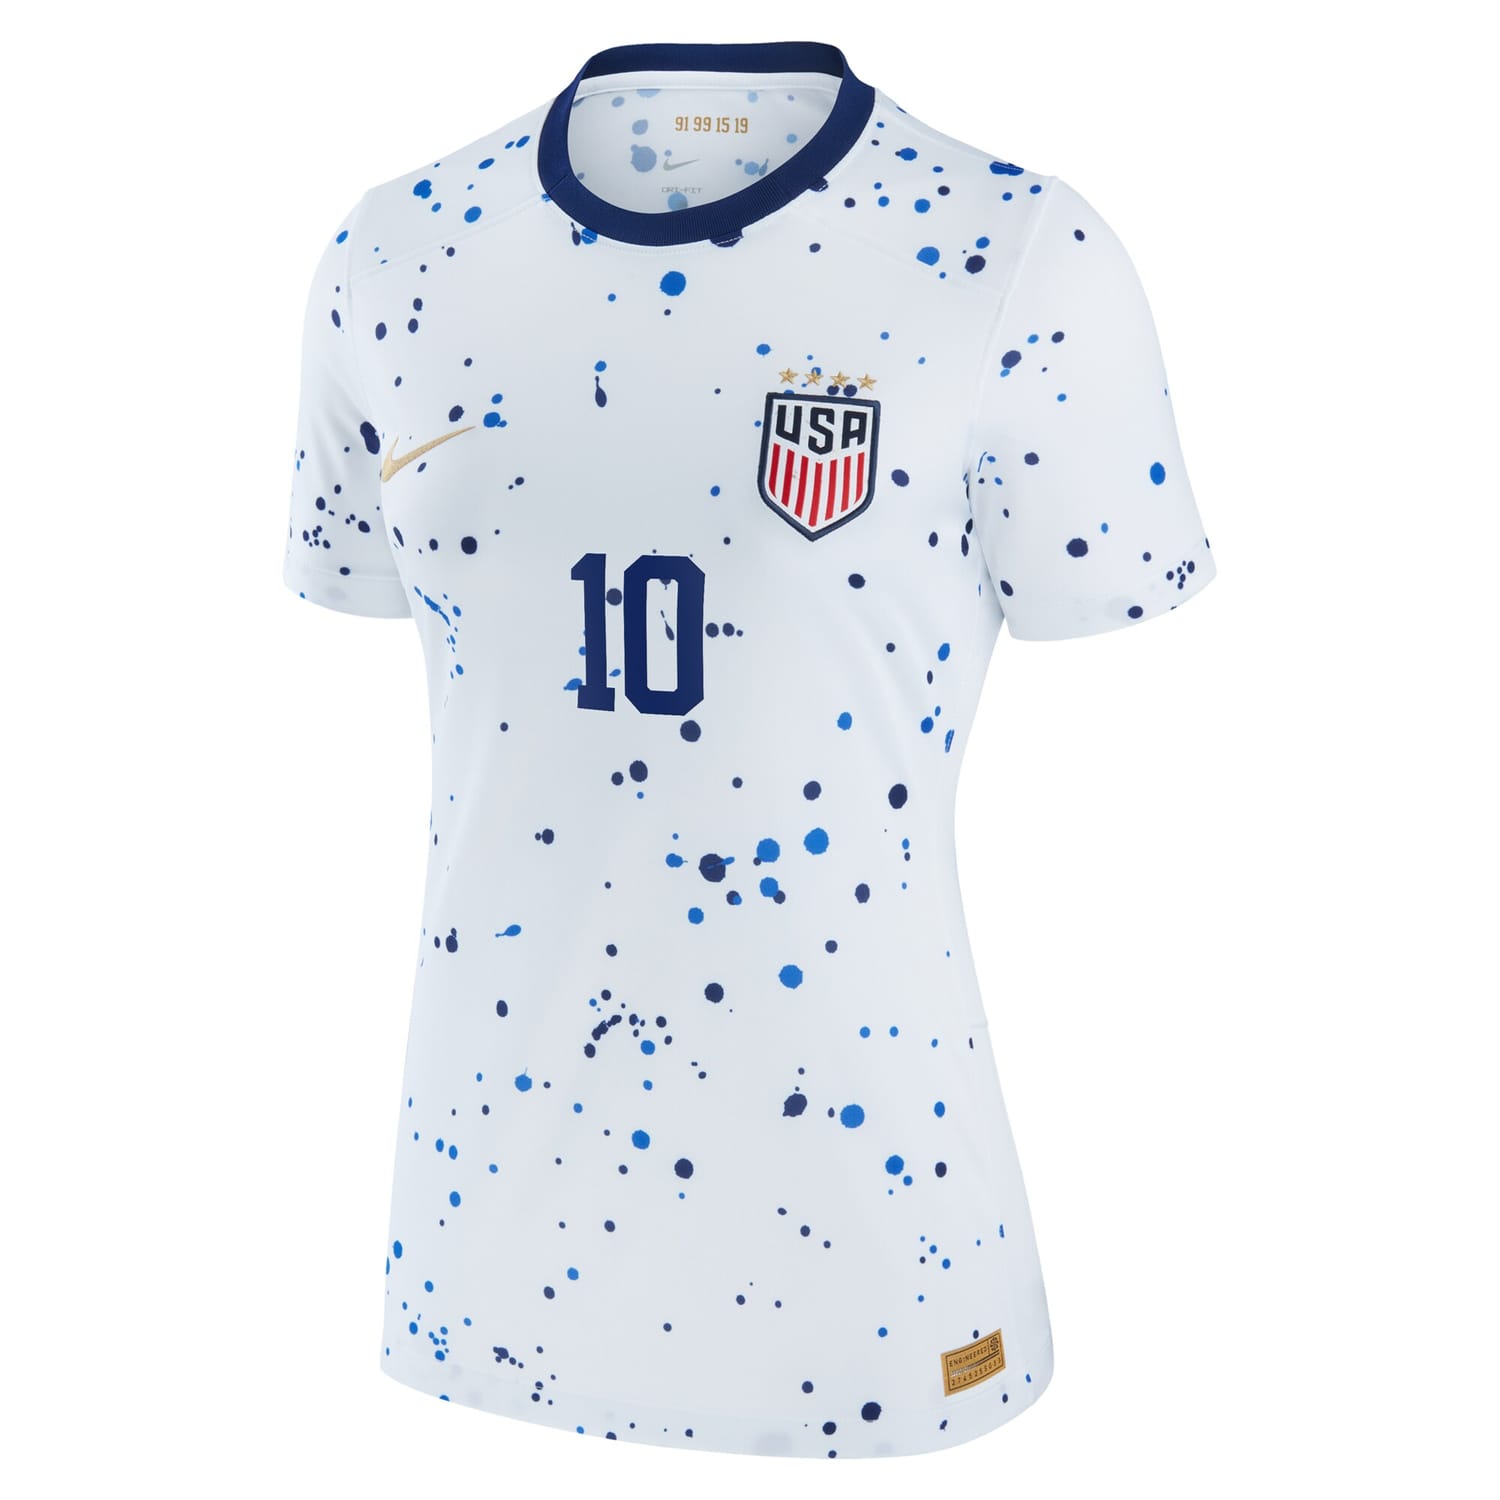 USWNT Home Jersey Shirt White 2023 player Lindsey Horan printing for Women